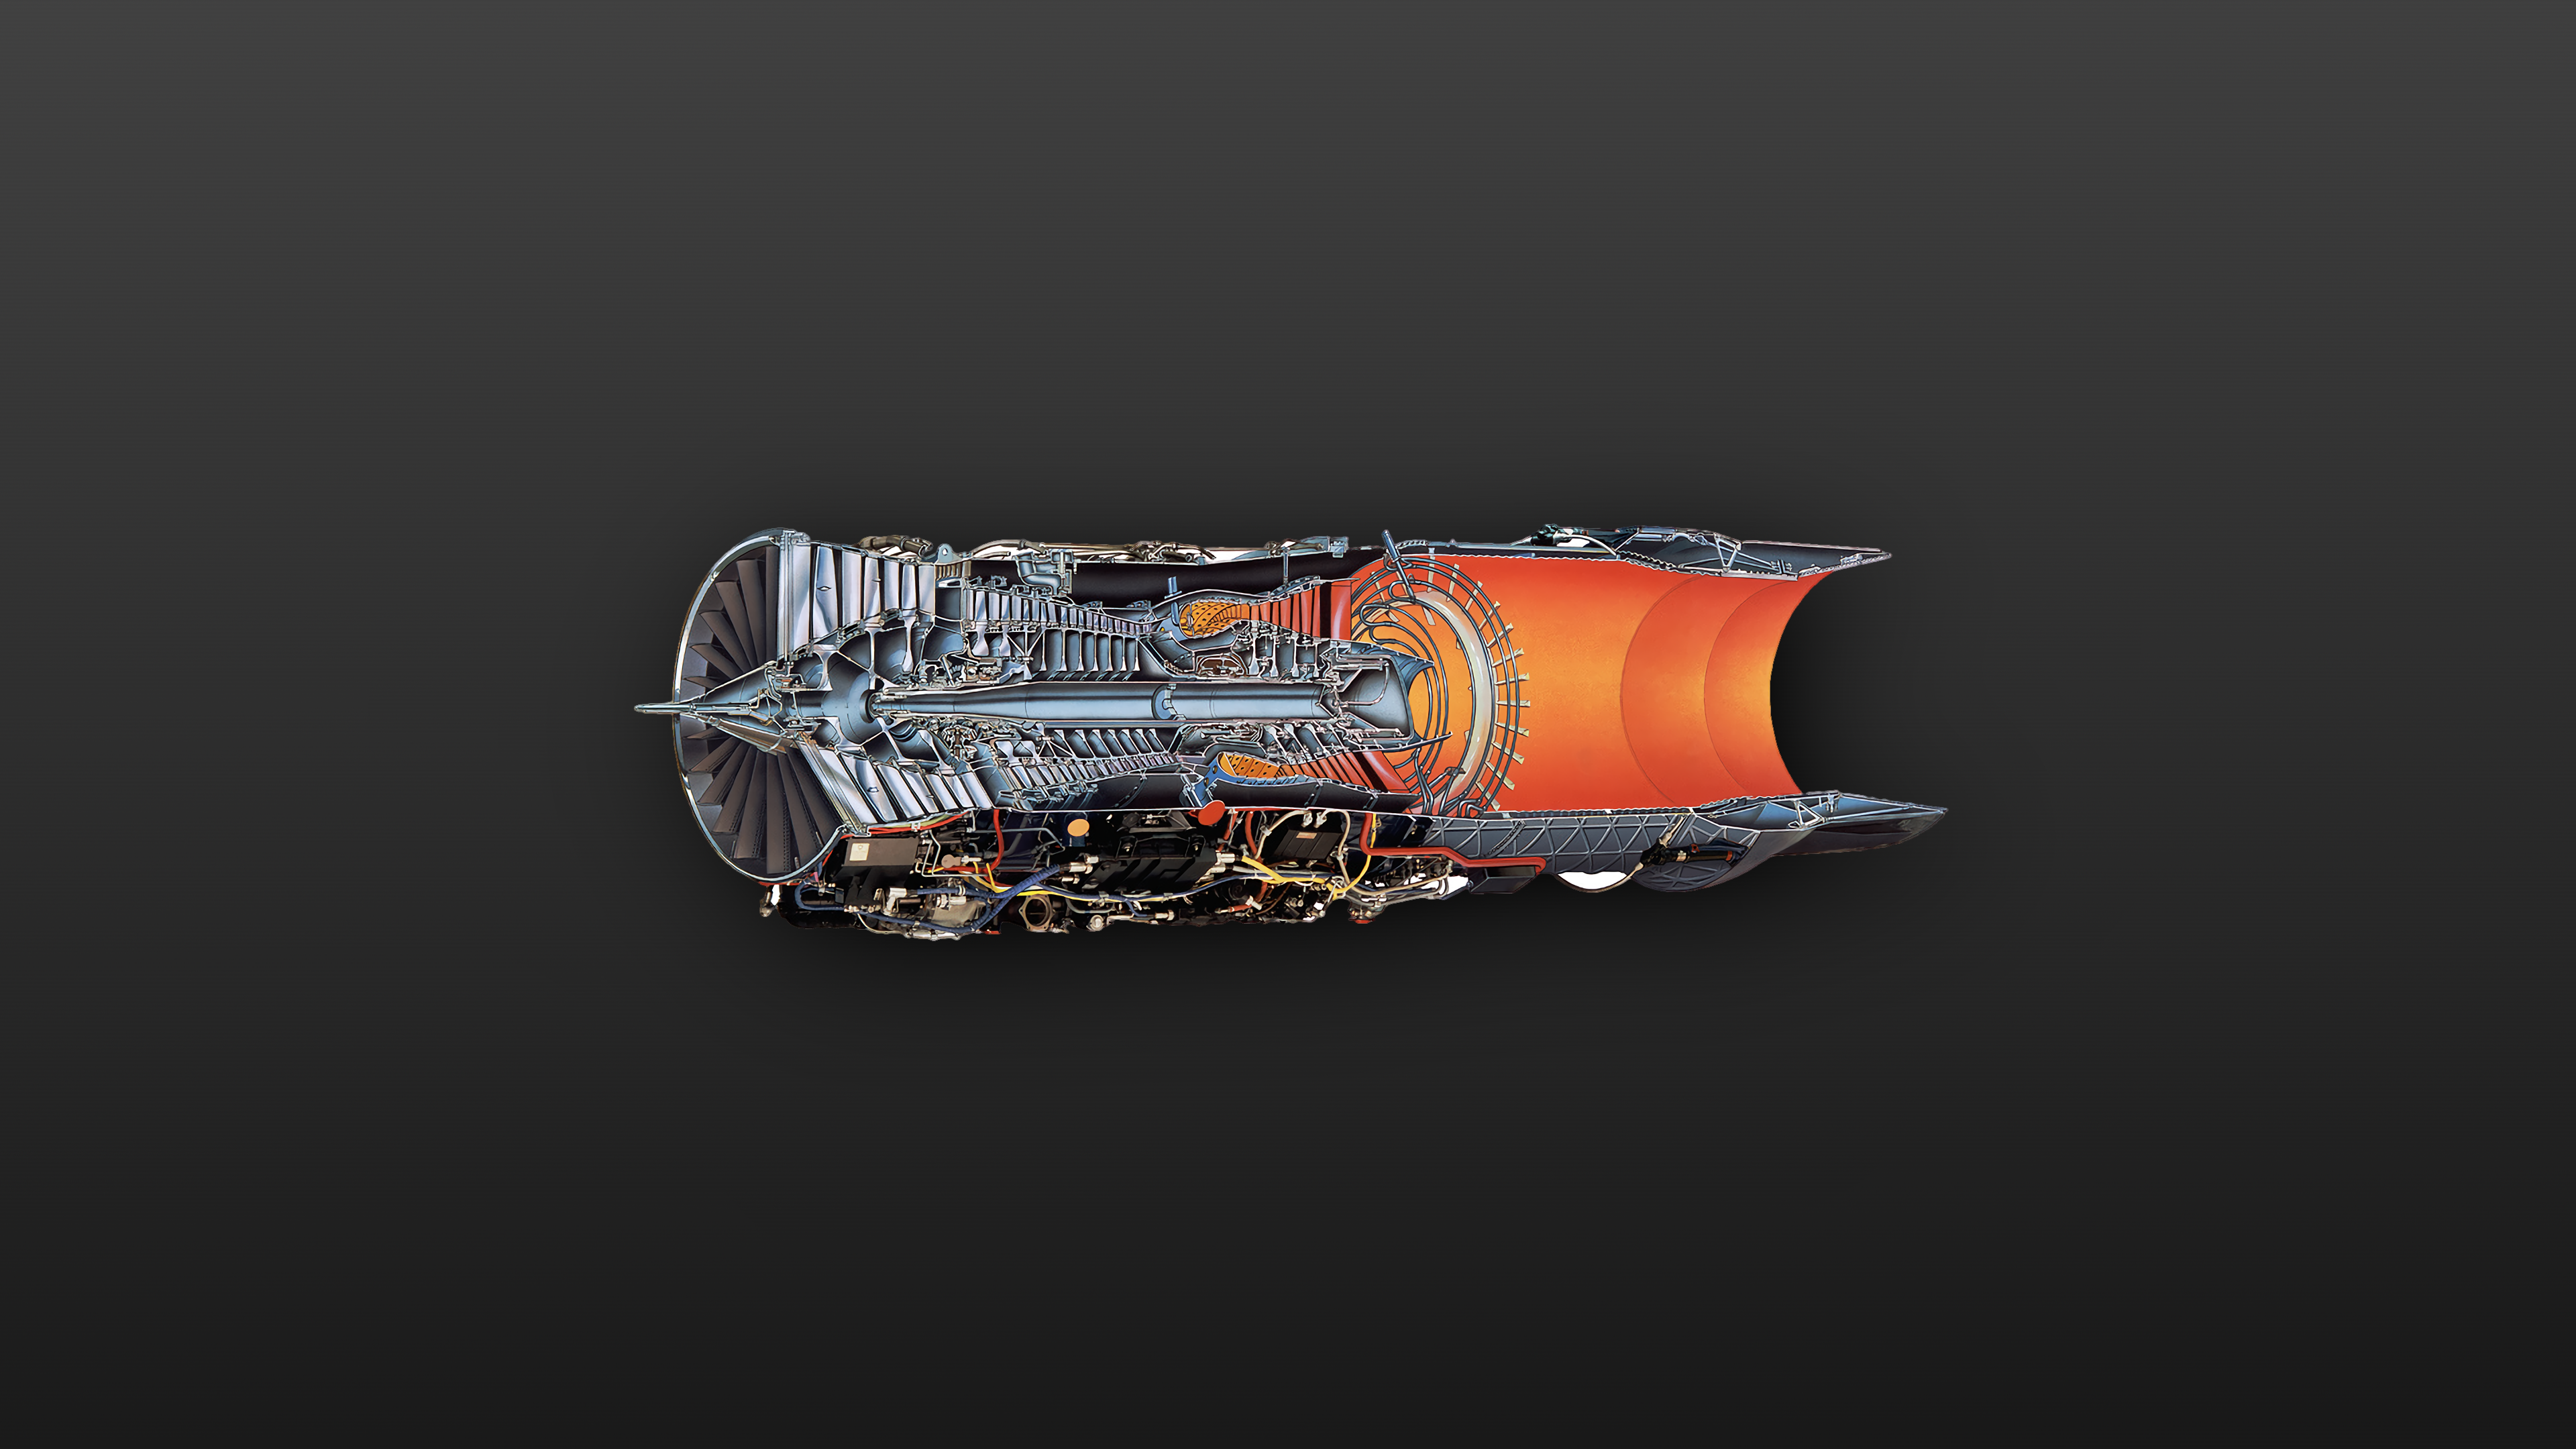 General 3840x2160 airplane engine cutaway drawing jet engine vehicle aircraft gray background simple background artwork technology